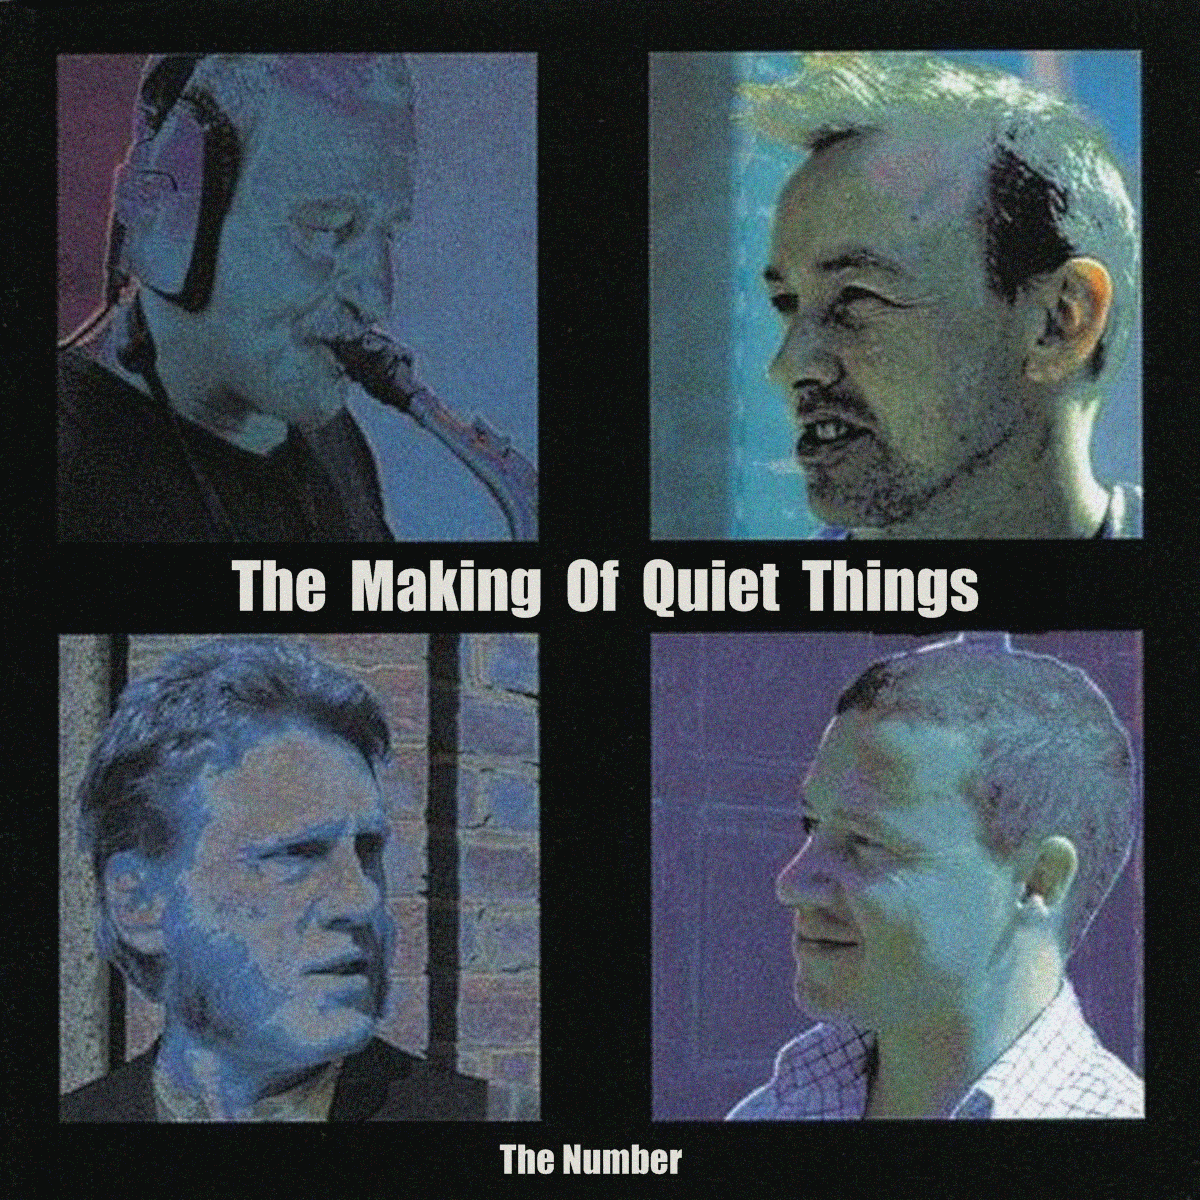 The number – the making of quiet things. Gary Curson,Keith Tippett,John Edwards,Mark Sanders - Continuum. Something quiet skele. Quiet things